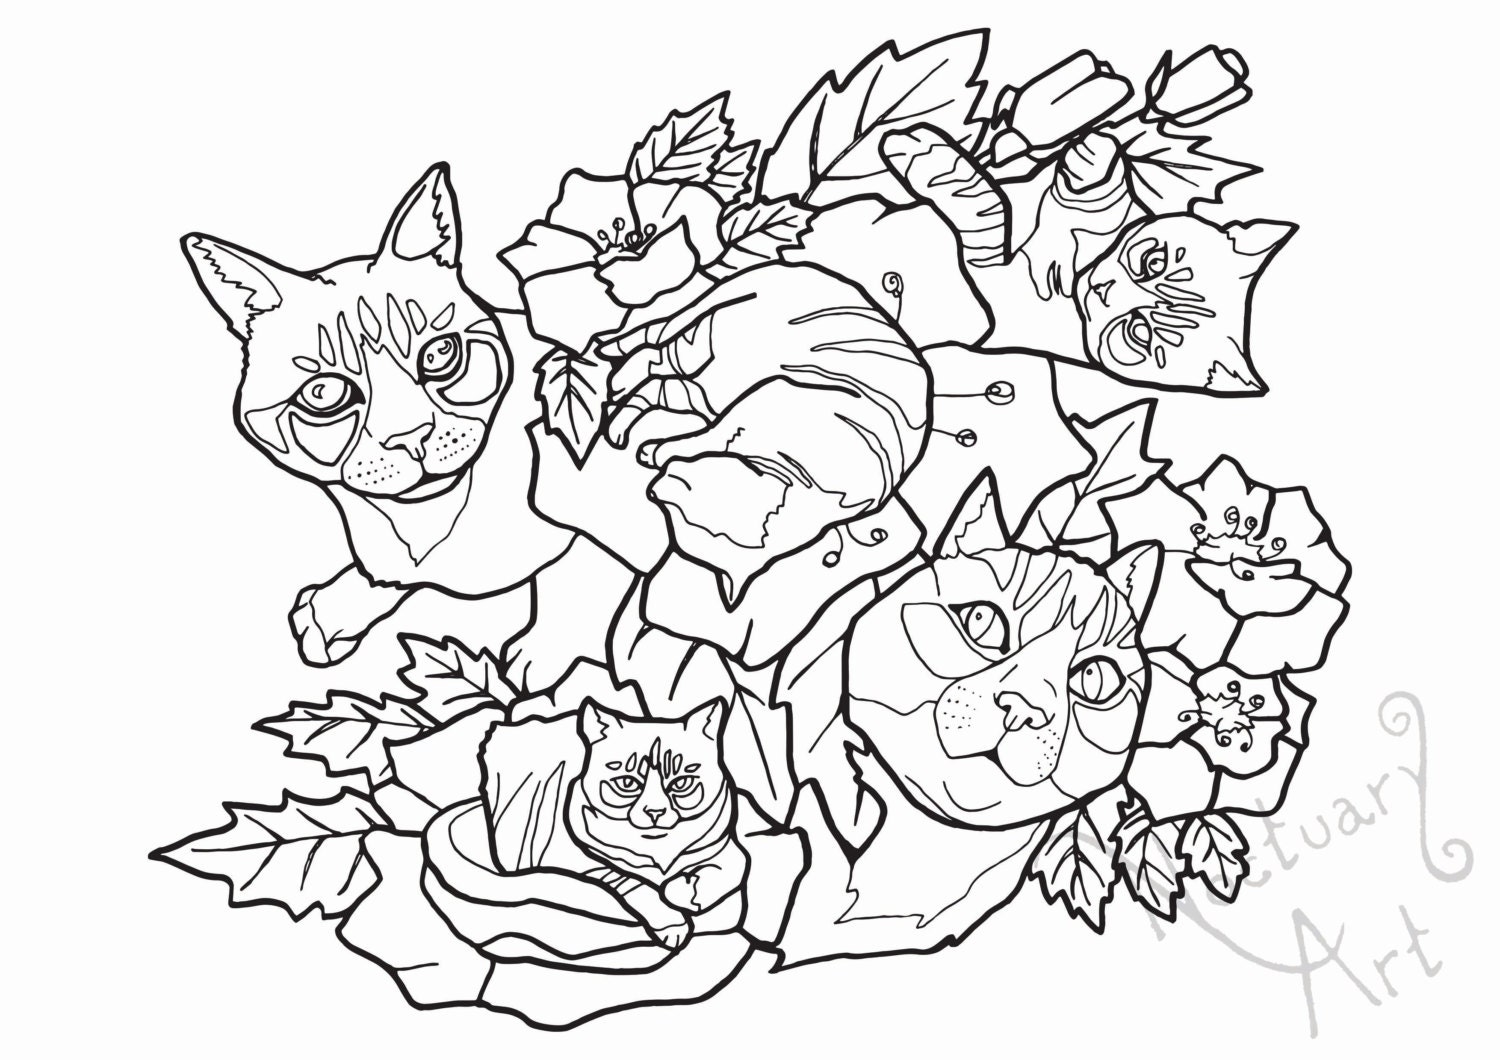 Printable coloring page cats and flowers by NoctuaryArt on Etsy